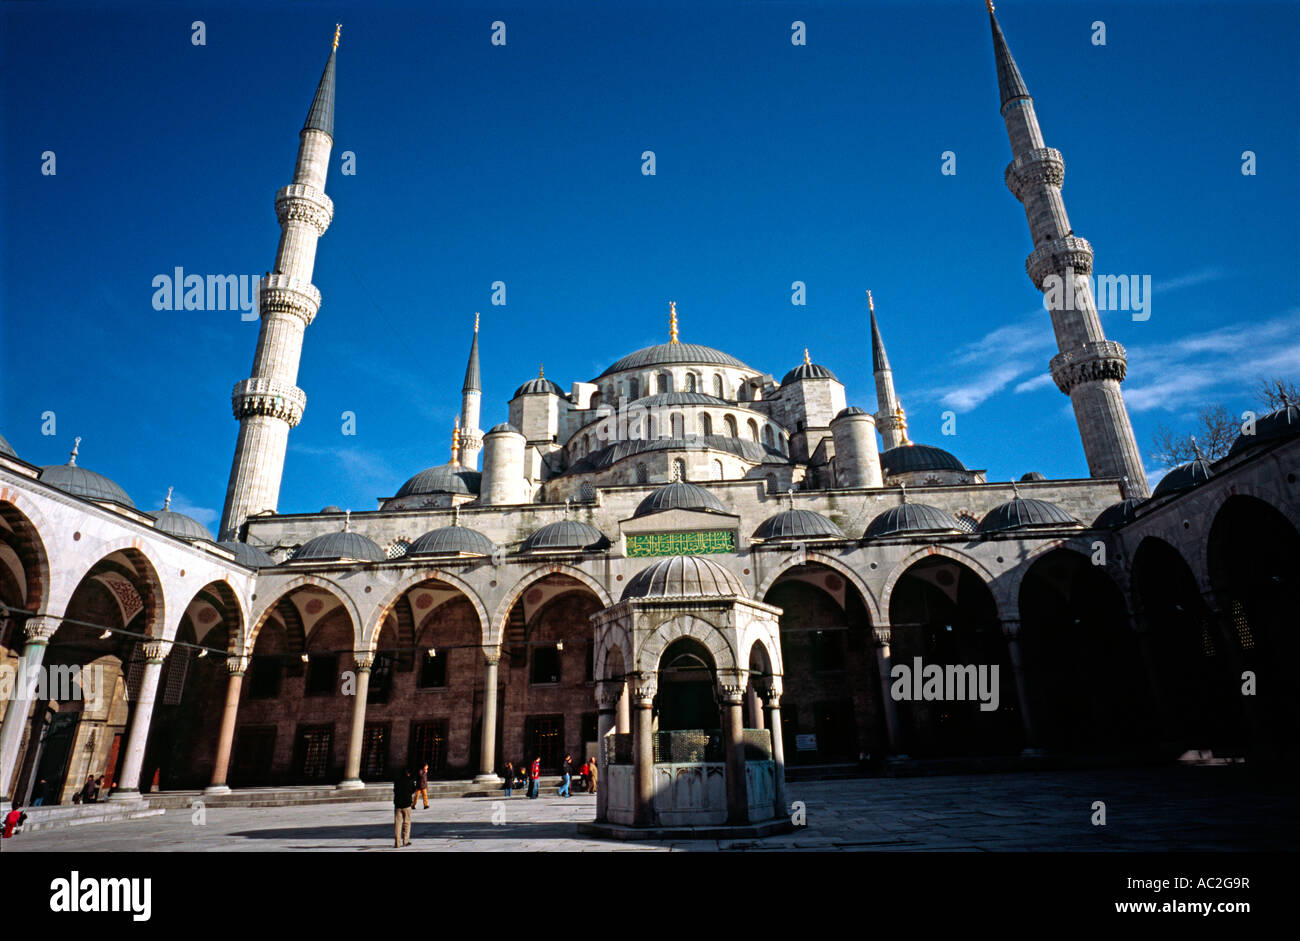 March 14, 2006 - Sultan Ahmed Mosque (Sultanahmet Camii) or Blue Mosque in Istanbul. Stock Photo